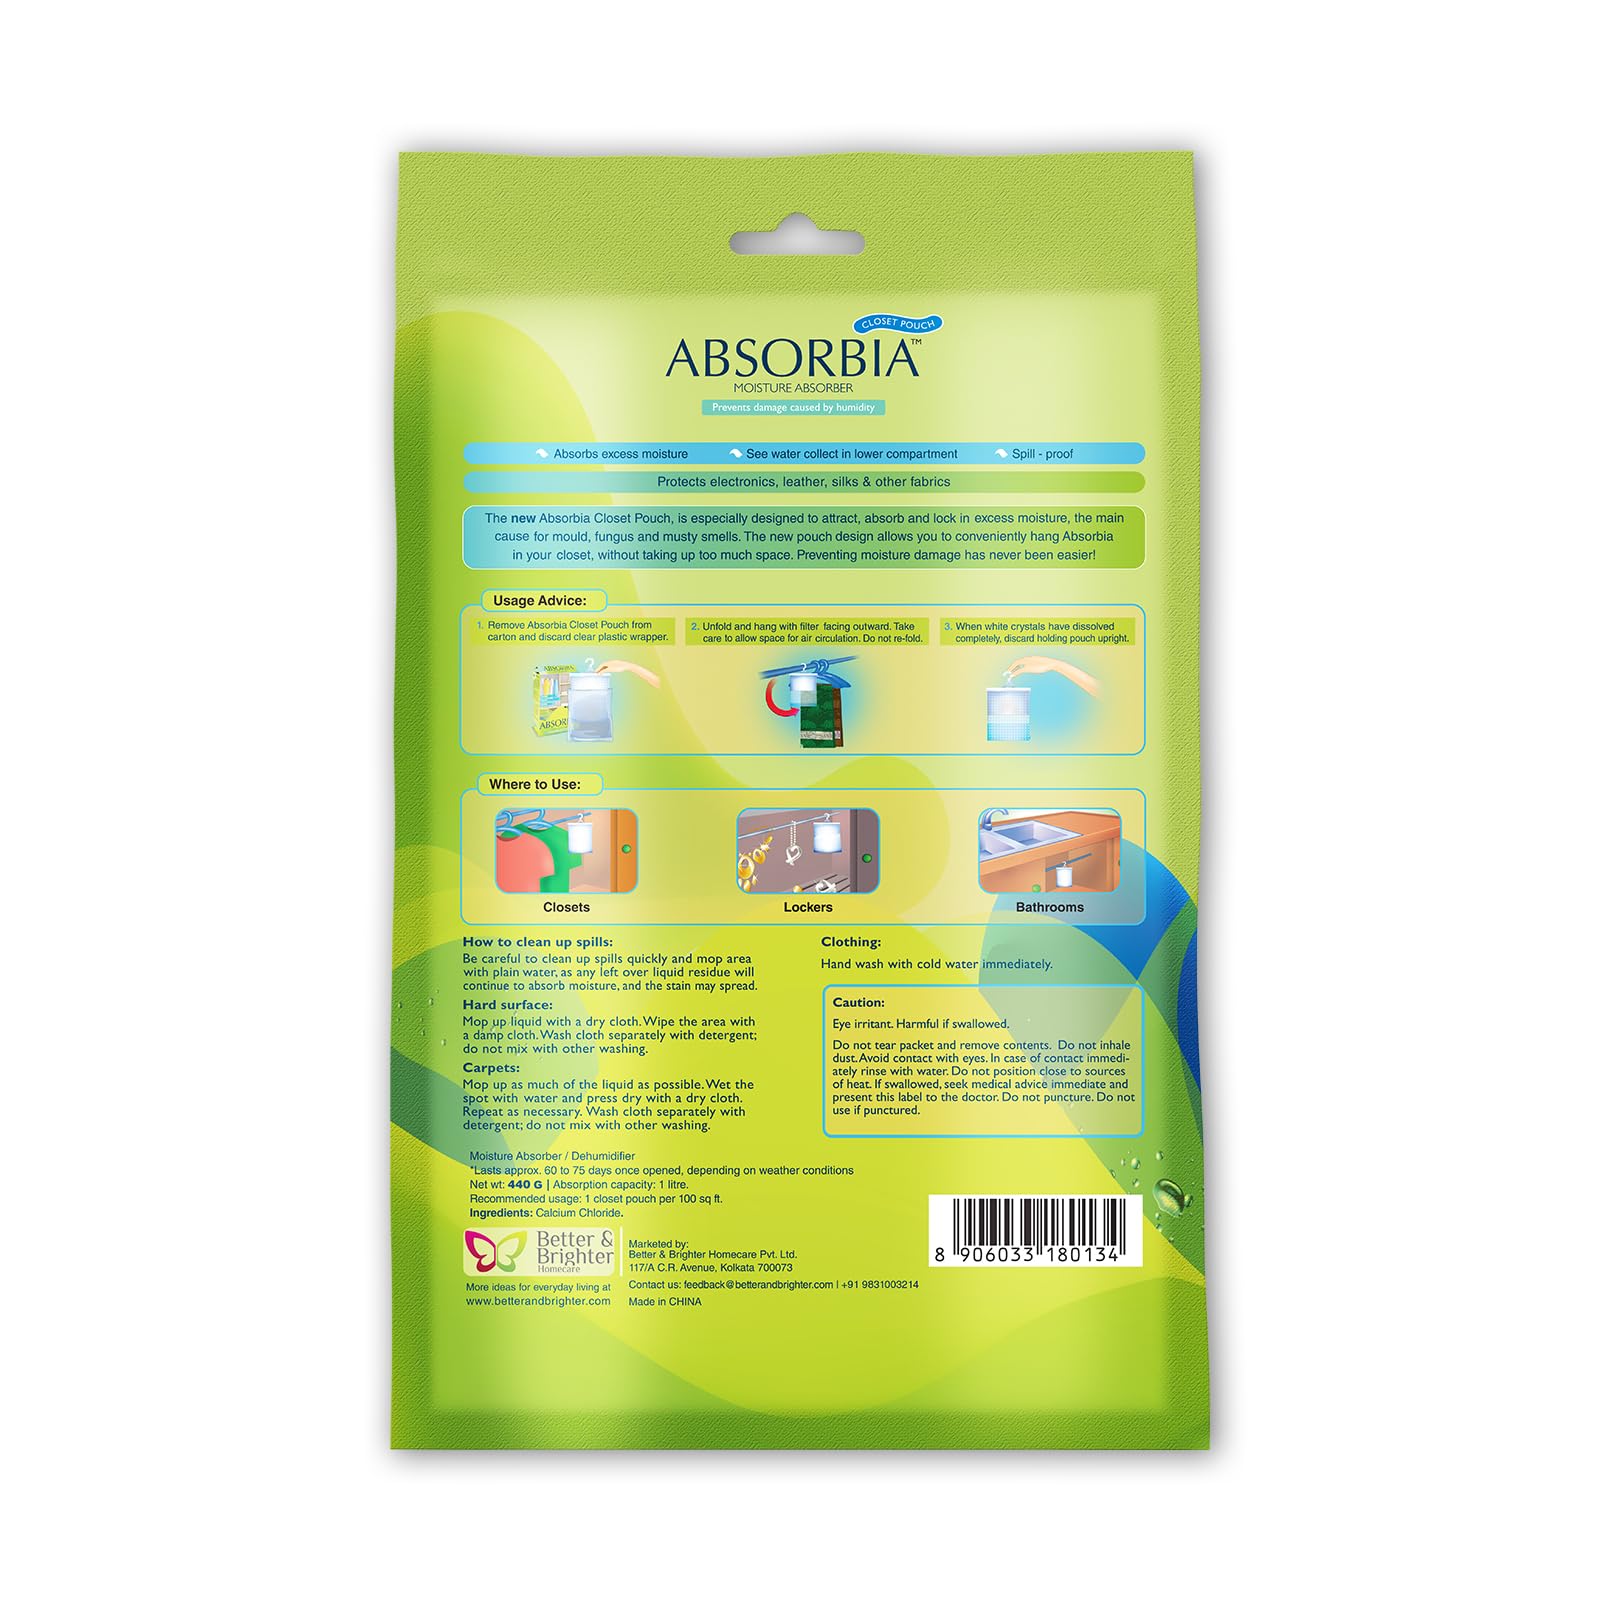 Absorbia Moisture Absorber| Absorbia Hanging Pouch - Season Pack of 12 (880ml Each) | Dehumidifier for Wardrobe, Closet Bathroom| Fights Against Moisture, Mould, Fungus Musty Smells…